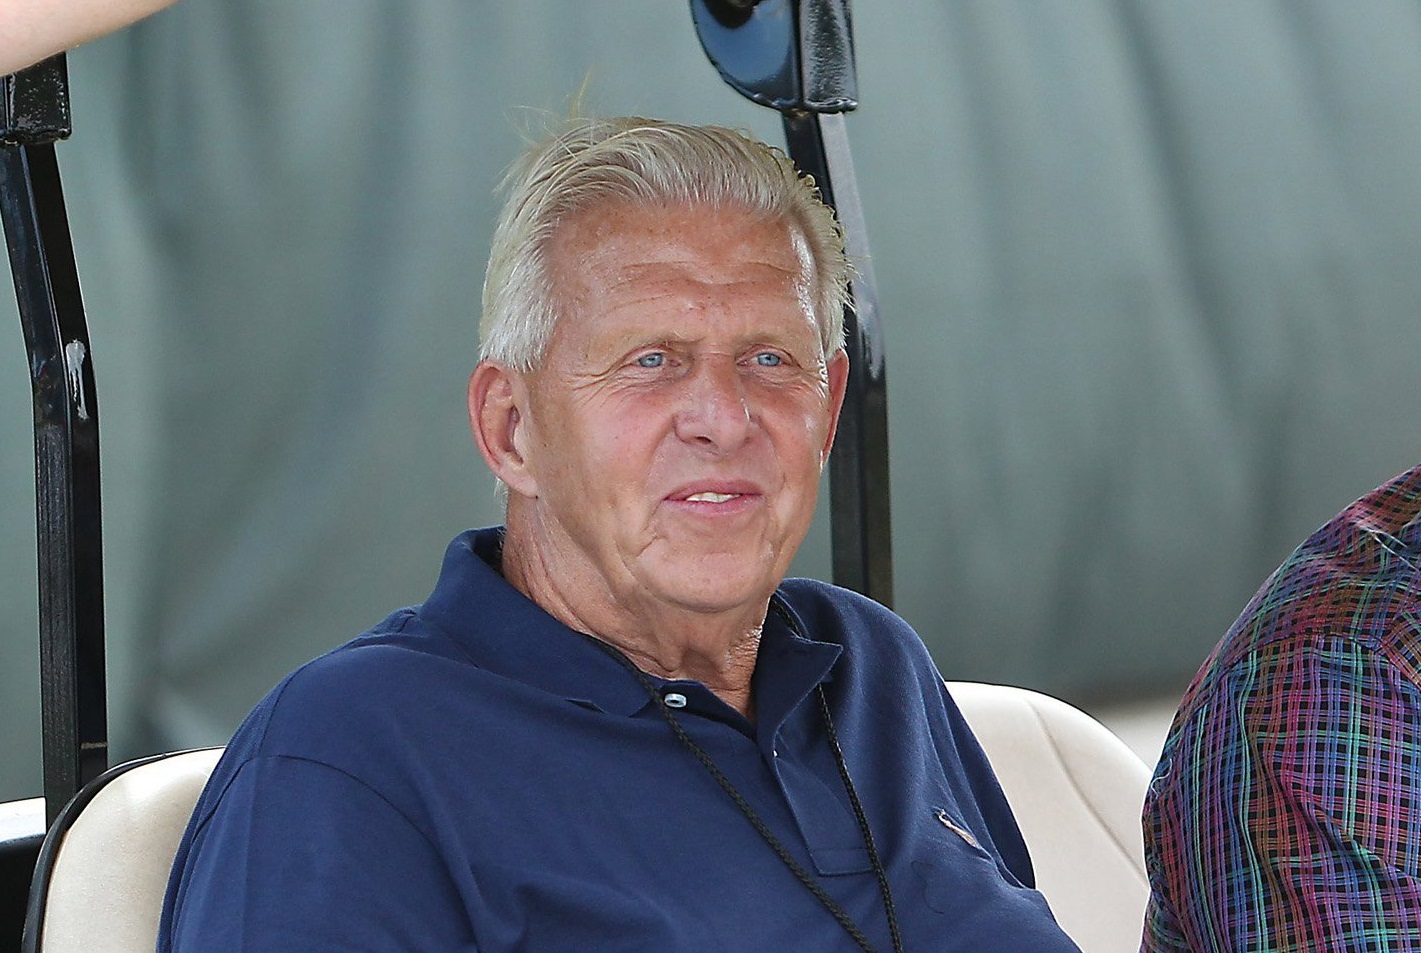 Bill Parcells won a pair of Super Bowls as coach of the New York Giants.